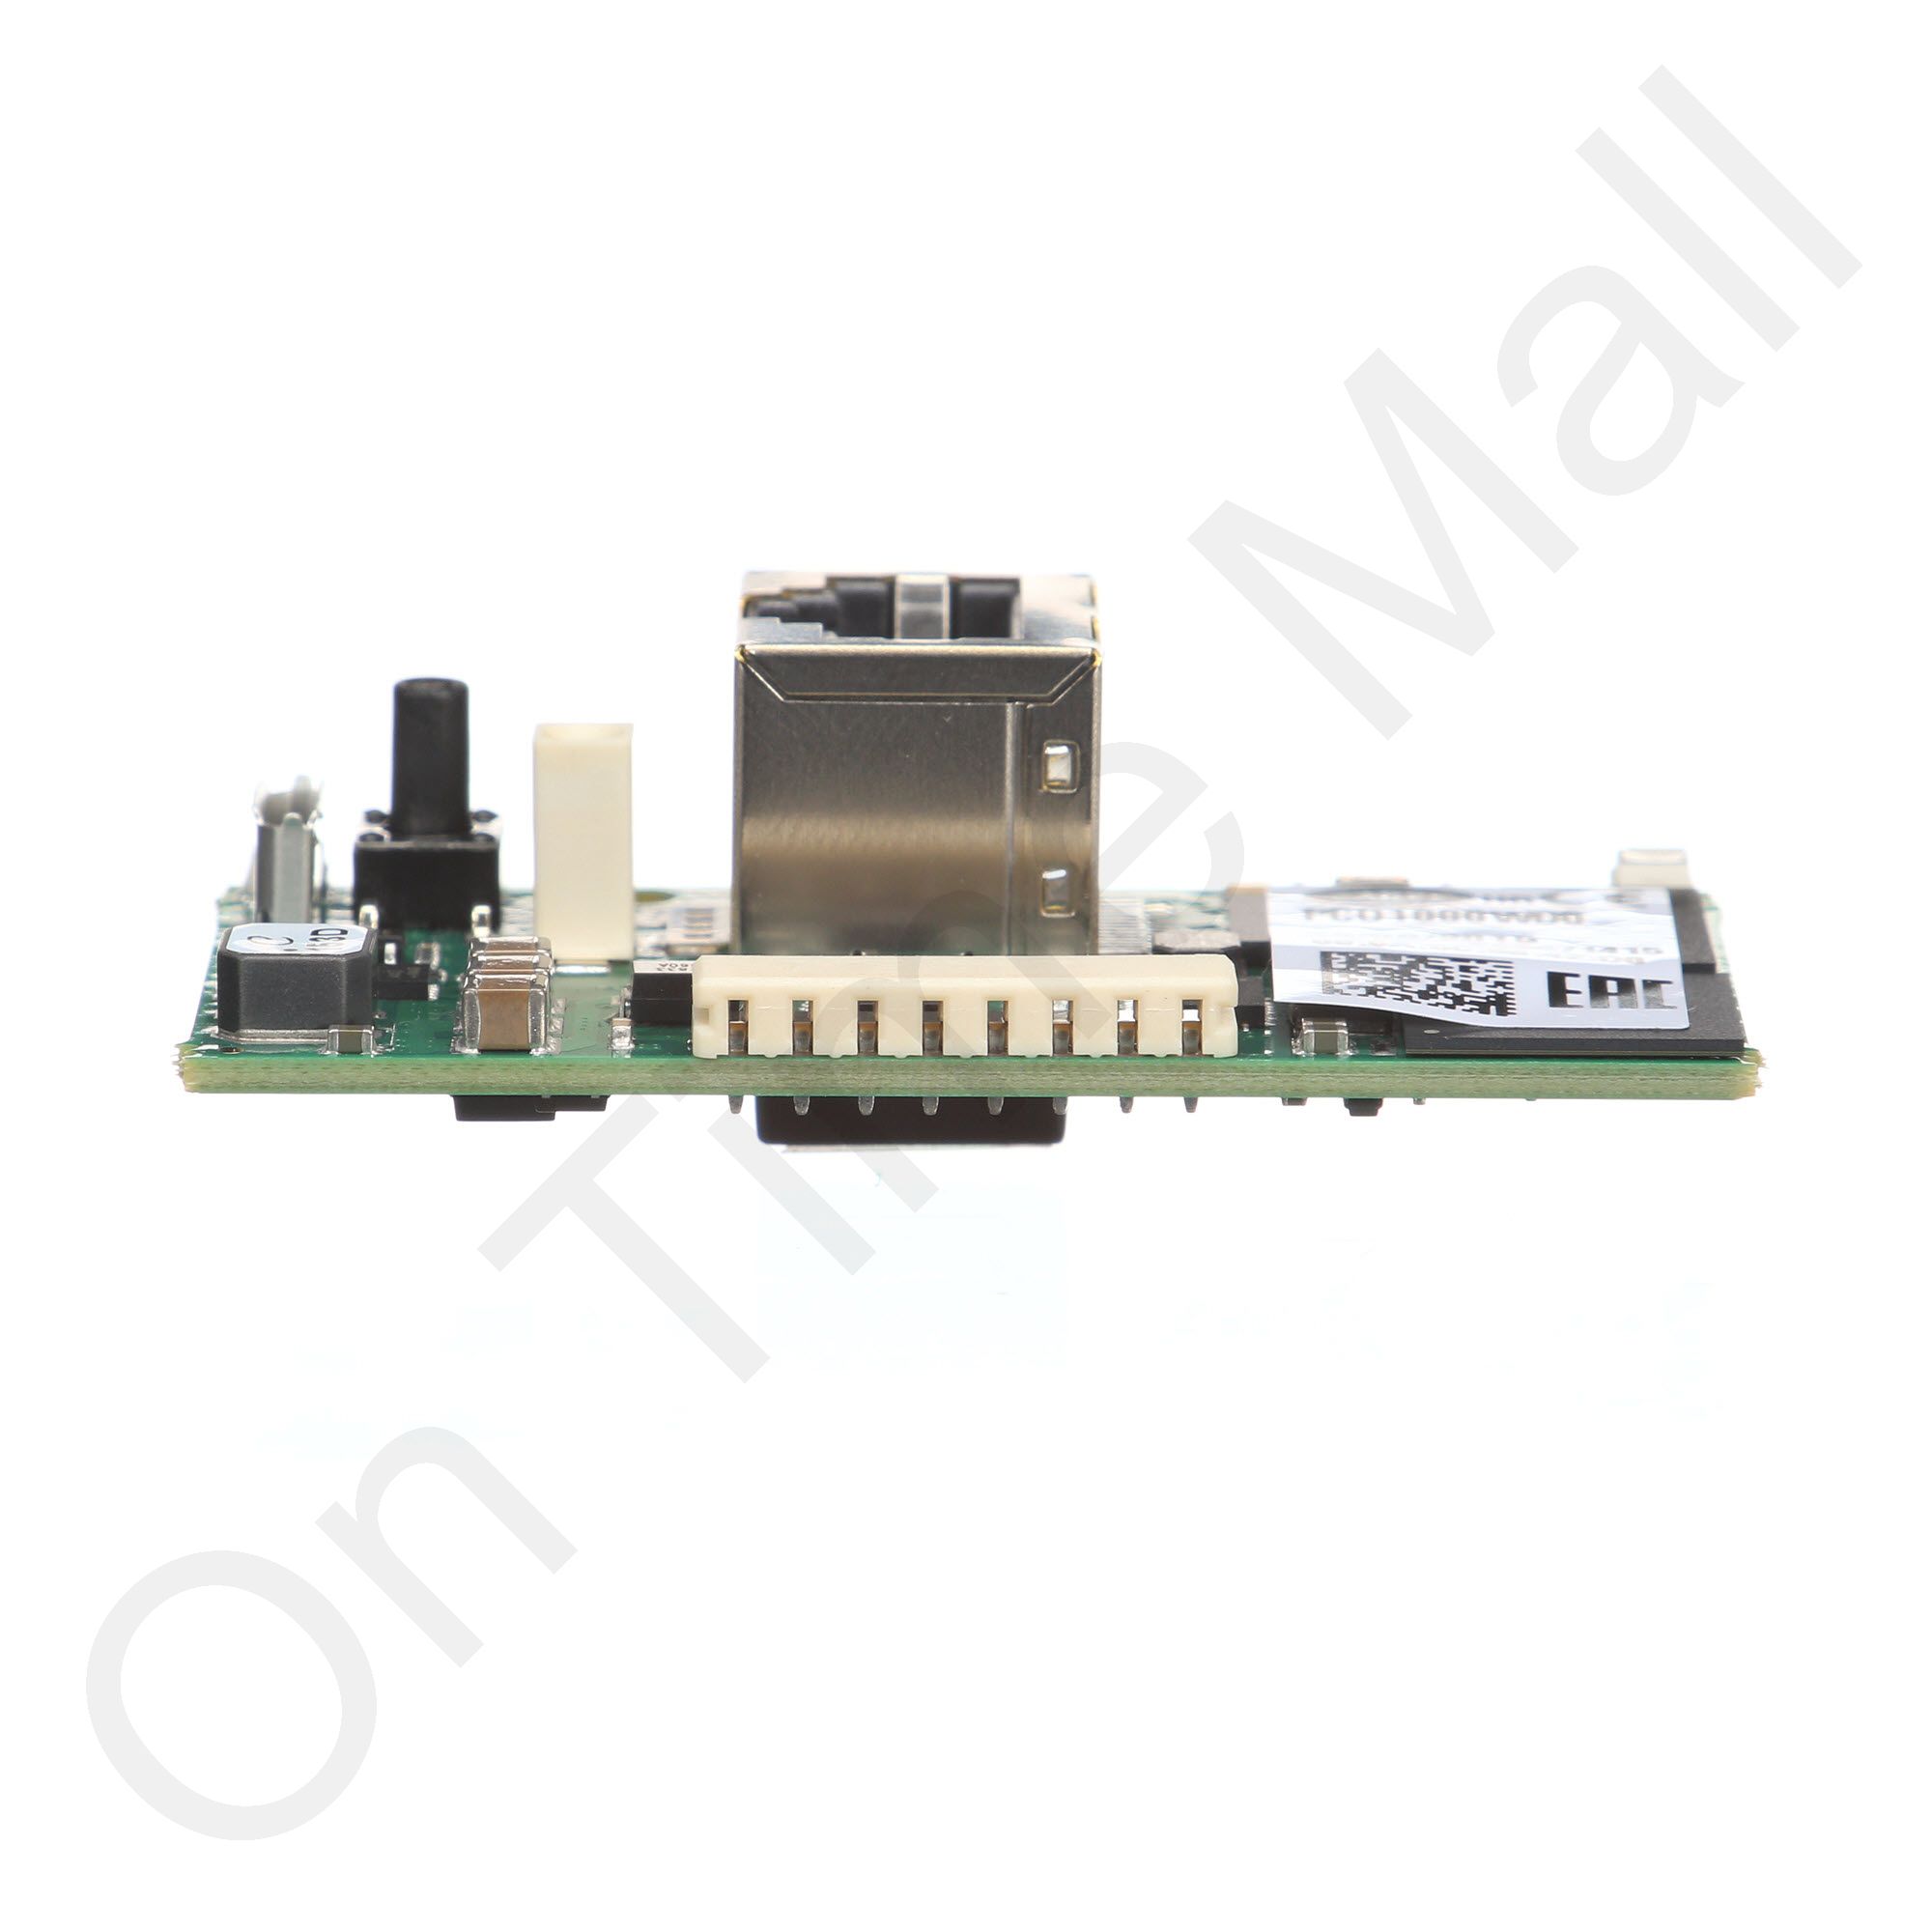 HTTP protocols pCOWEB Ethernet serial card for SNMP Bac-NET PCO1000WD0 